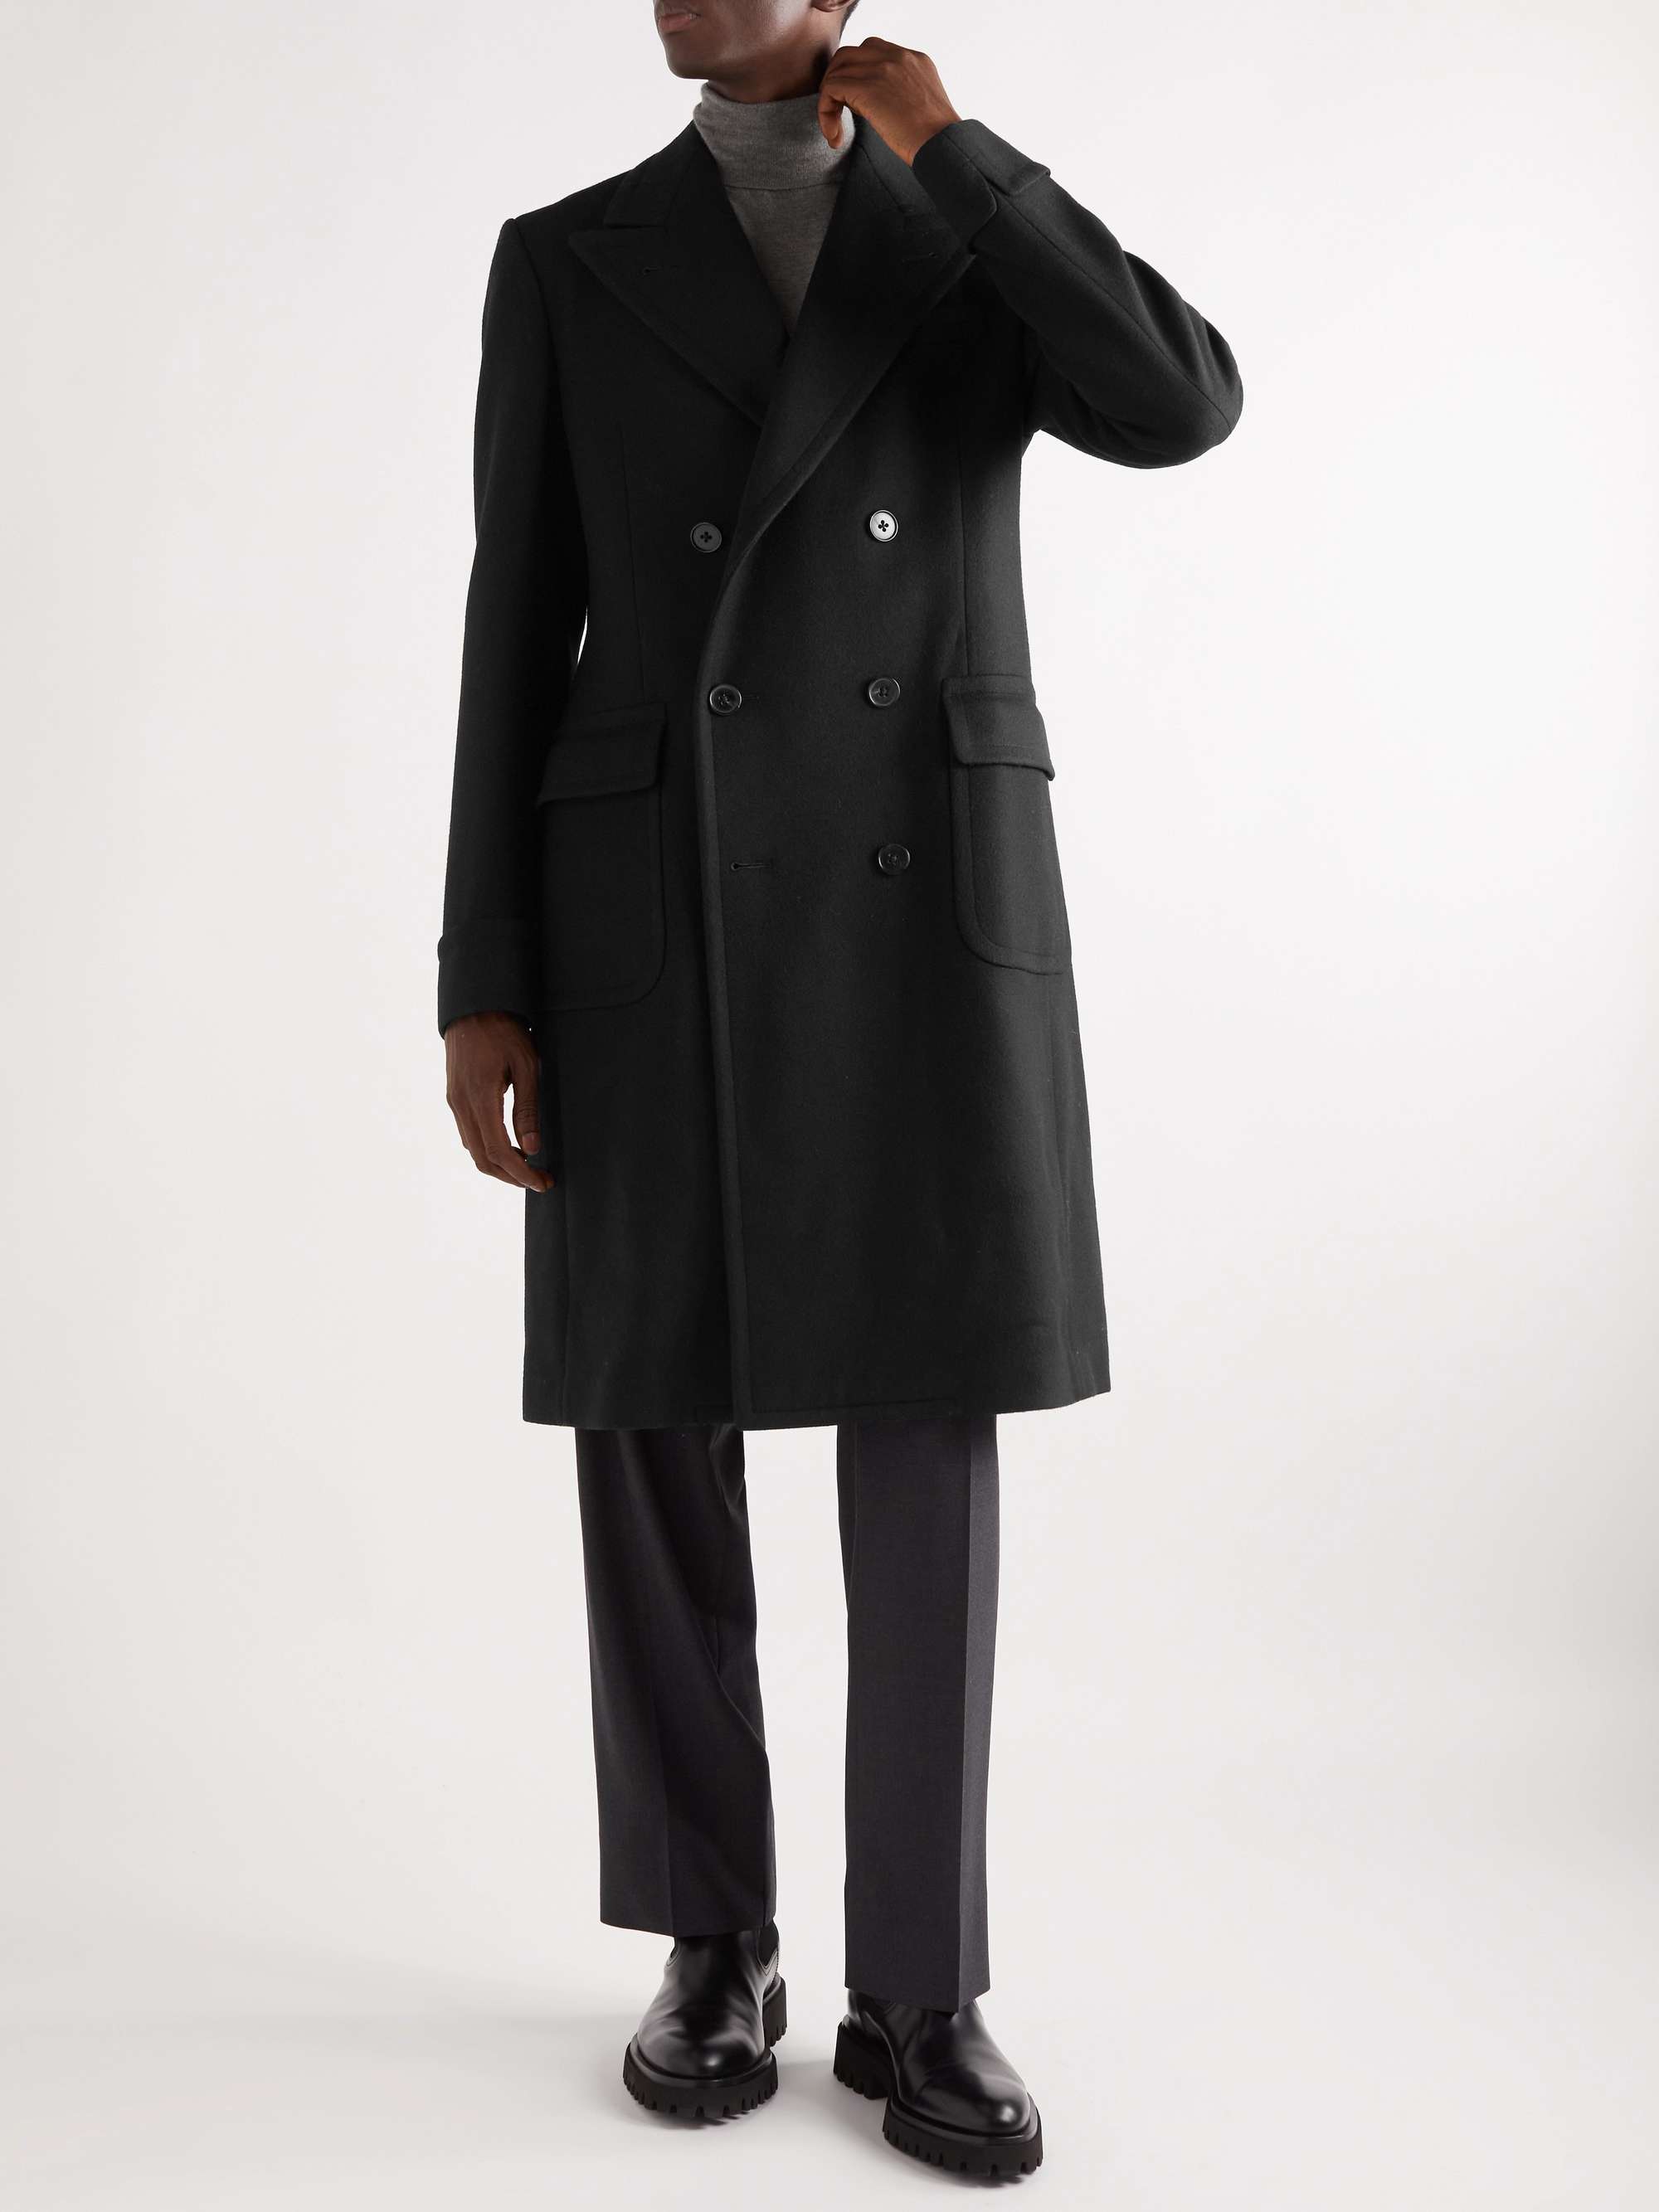 RALPH LAUREN PURPLE LABEL Double-Breasted Wool and Cashmere-Blend Coat | MR  PORTER